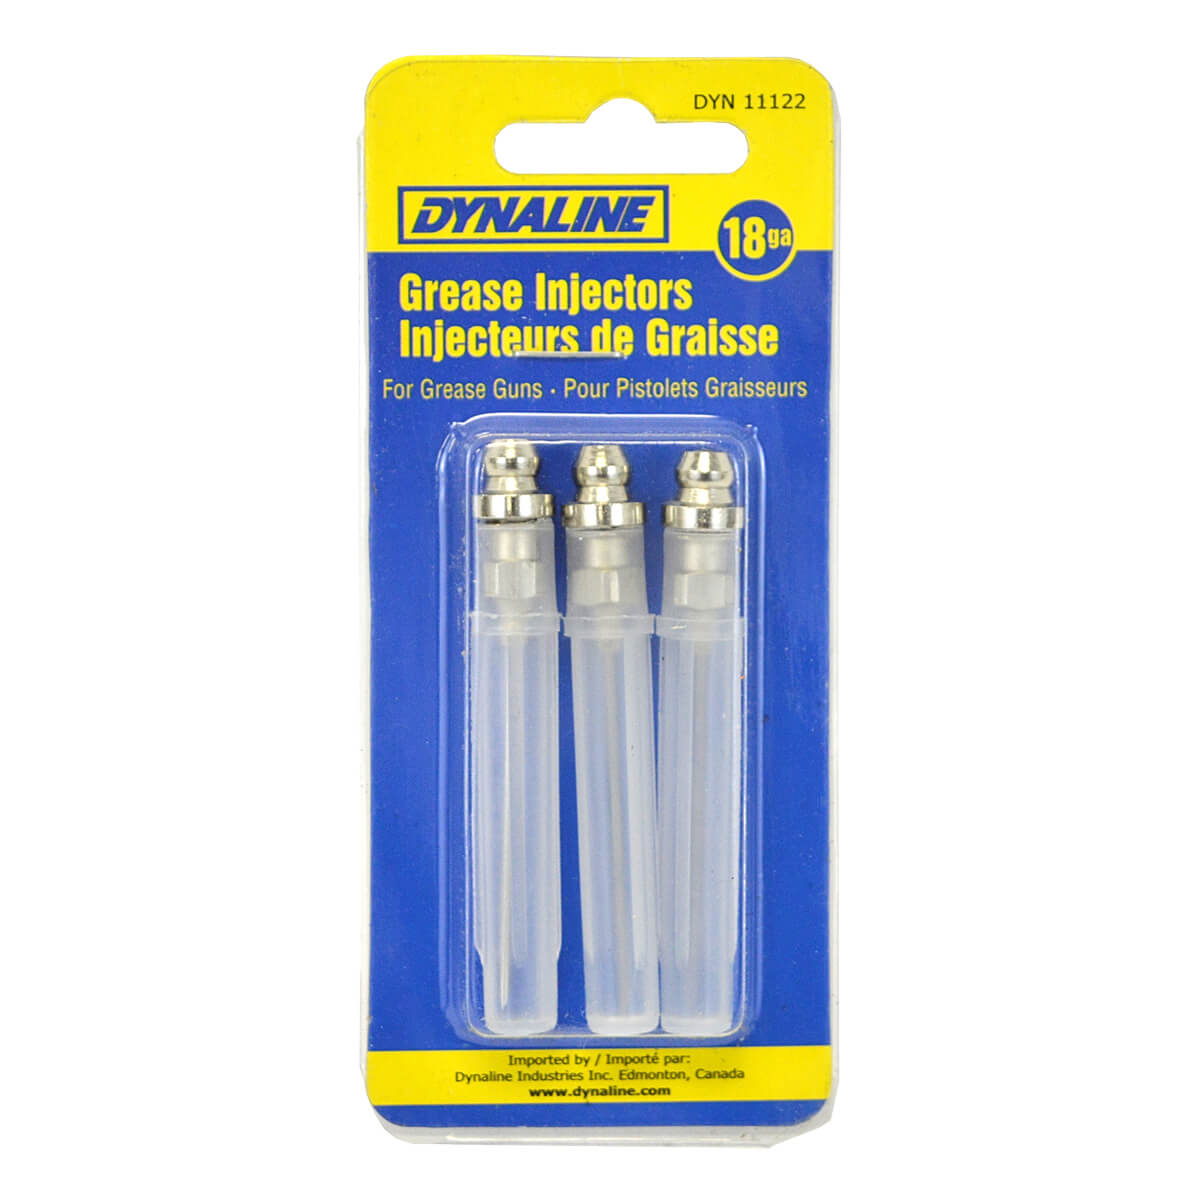 Grease Injectors - 3 Pack